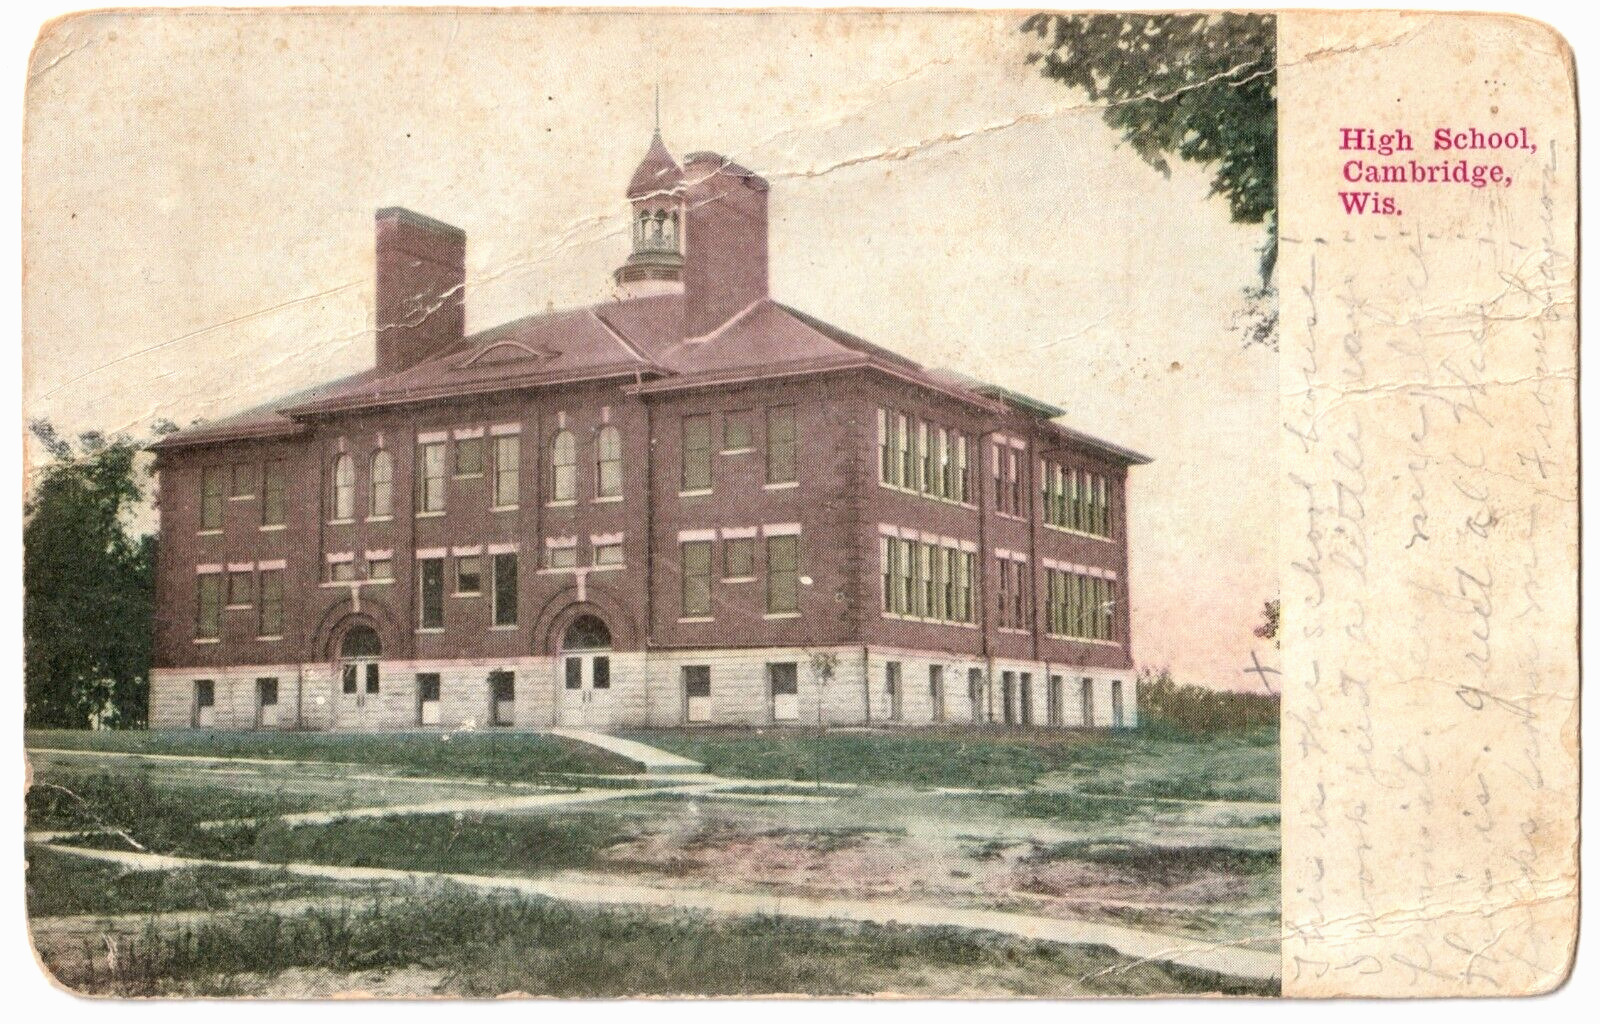 The High School-Cambridge, Wisconsin WI-1908 posted postcard